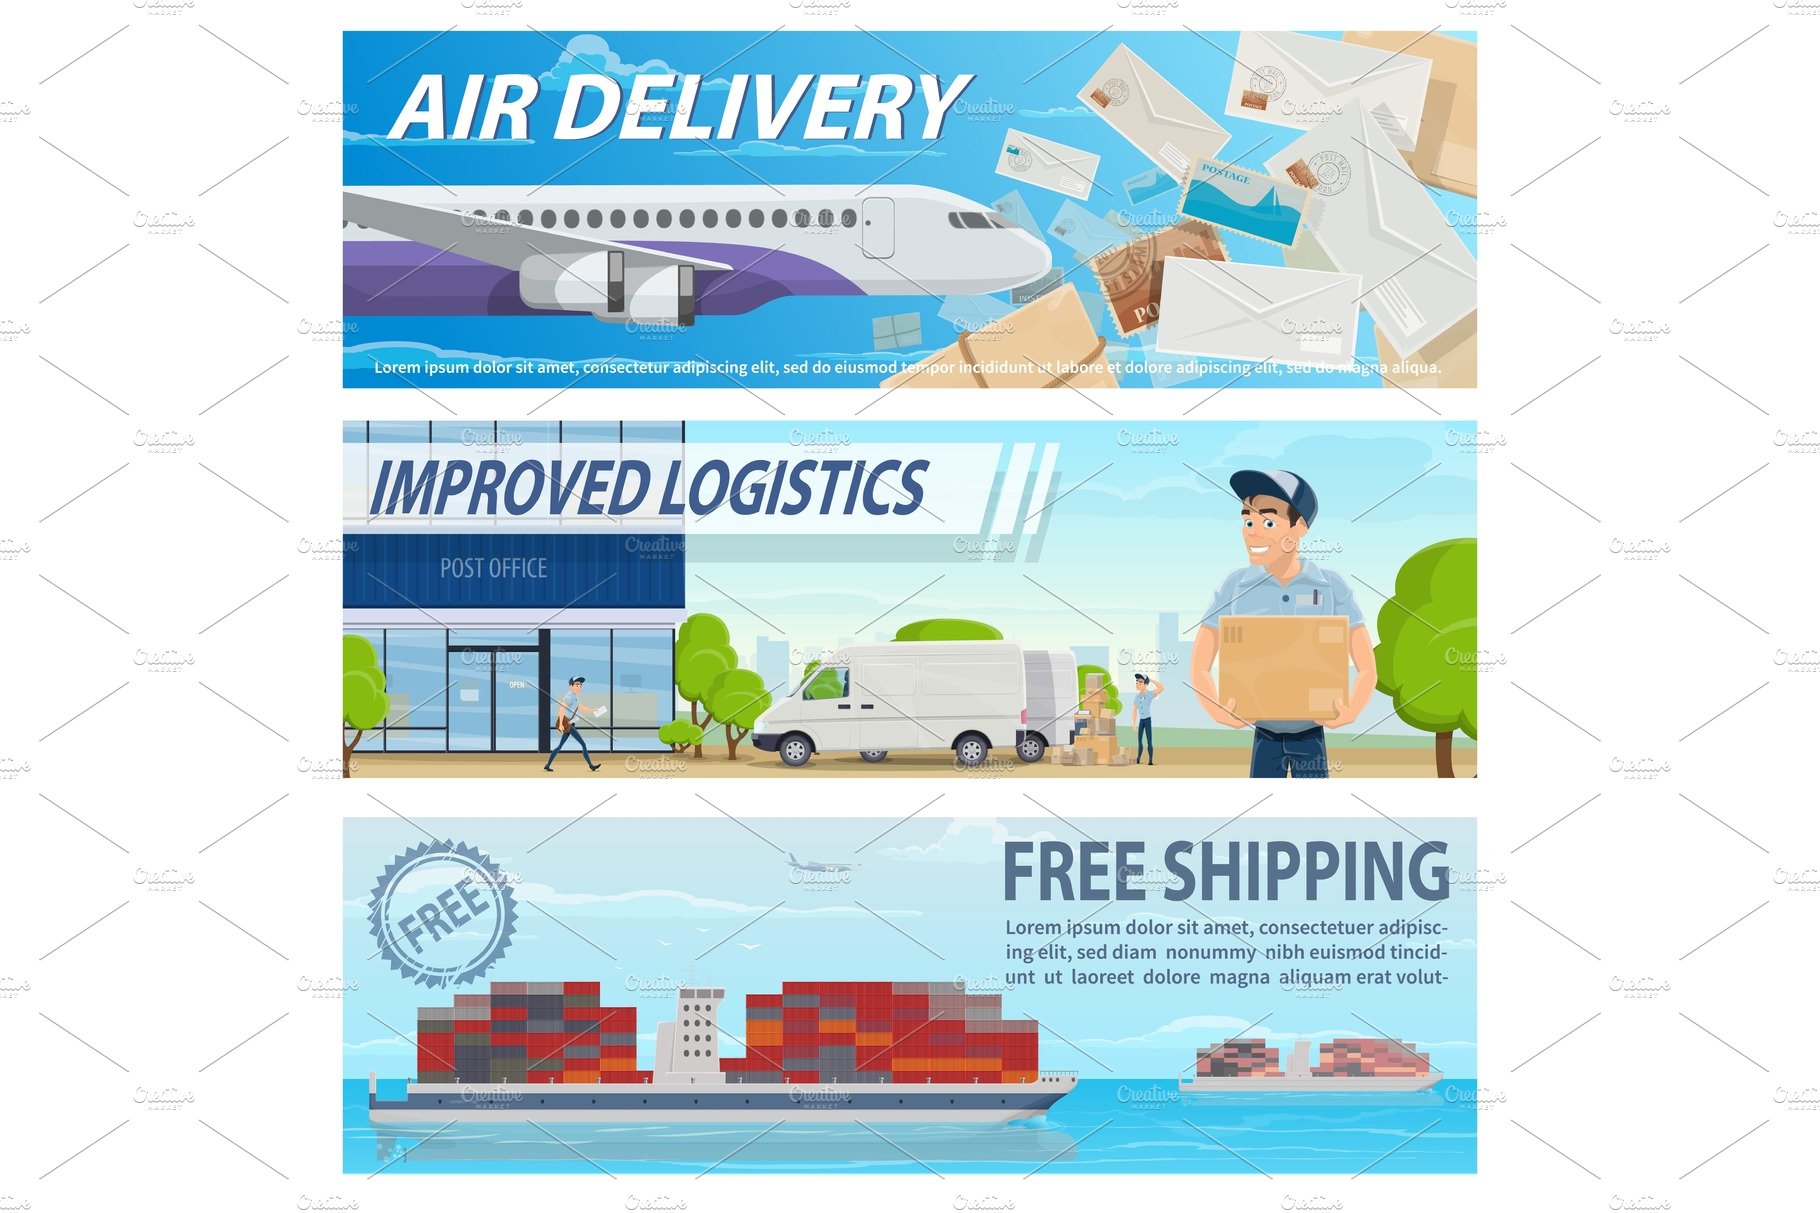 Post mail delivery, shipping service cover image.